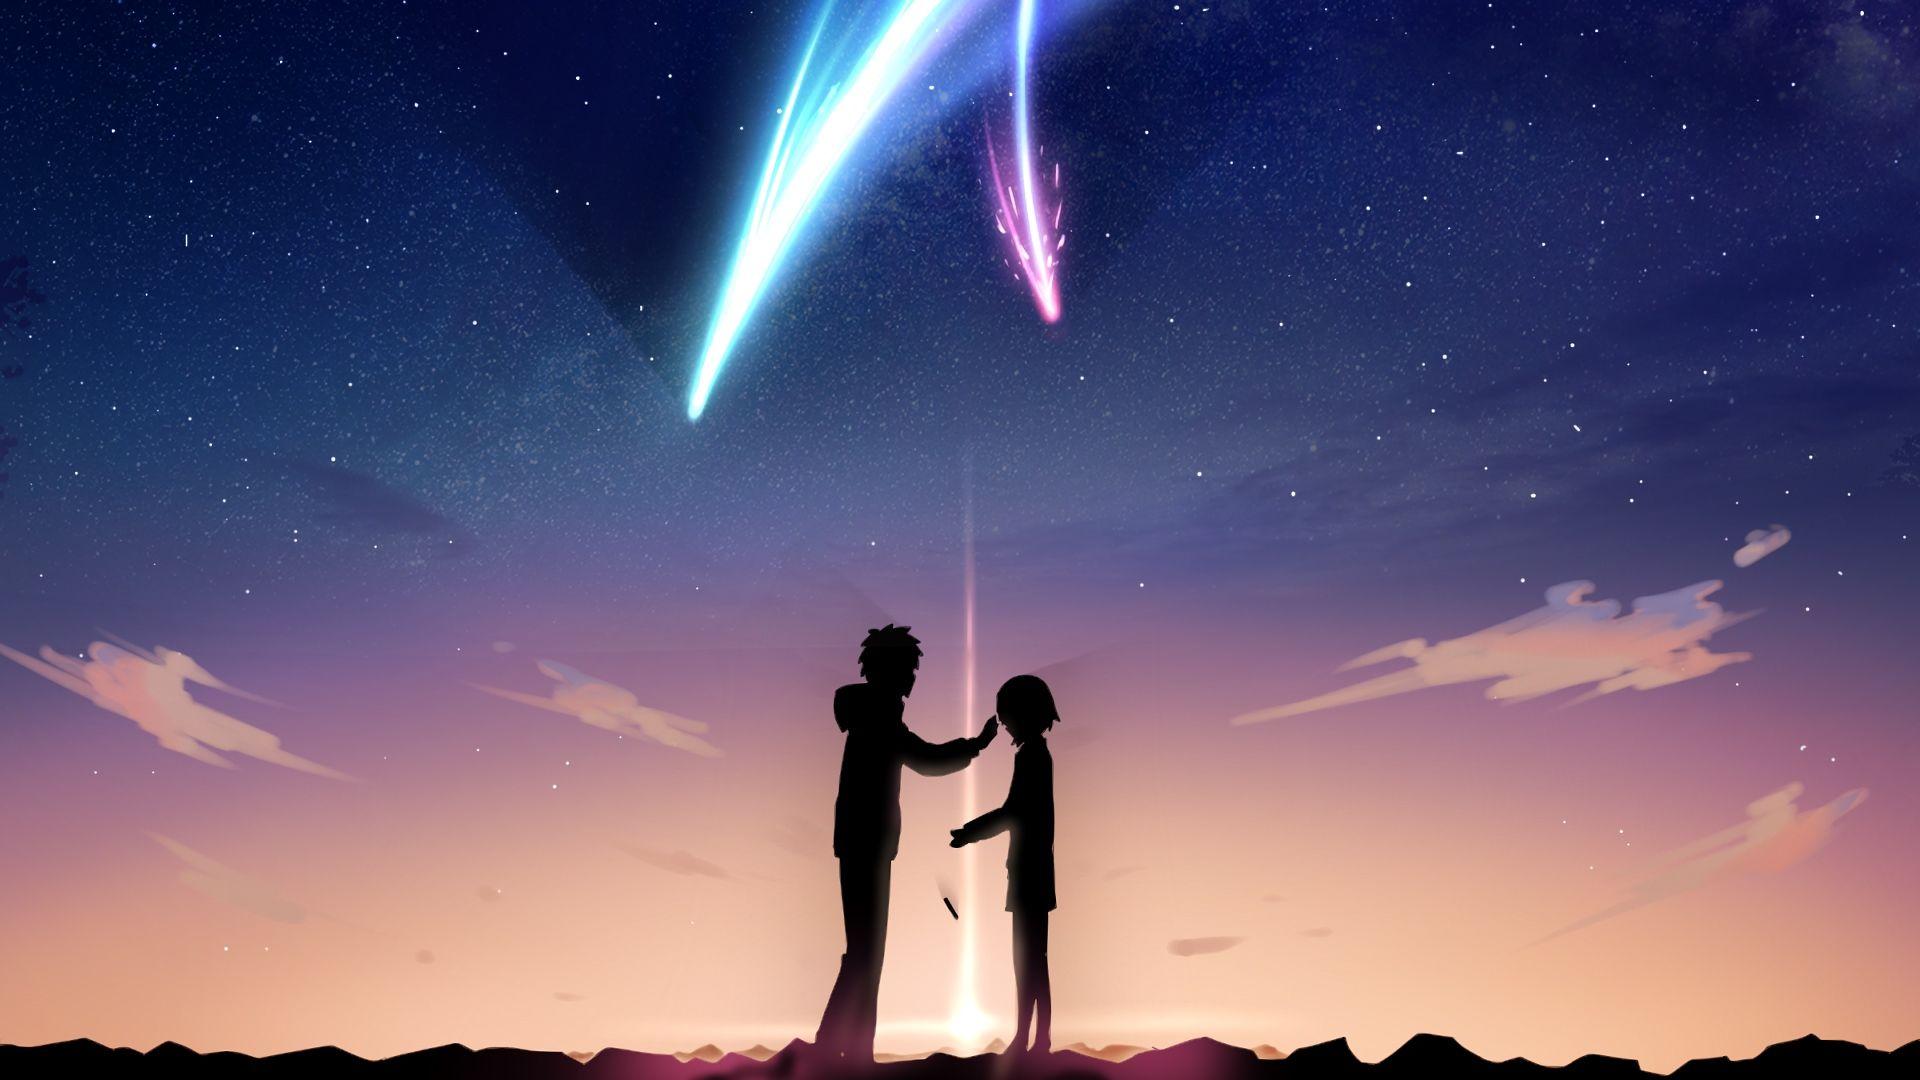 Your Name Anime Desktop Wallpapers - Wallpaper Cave